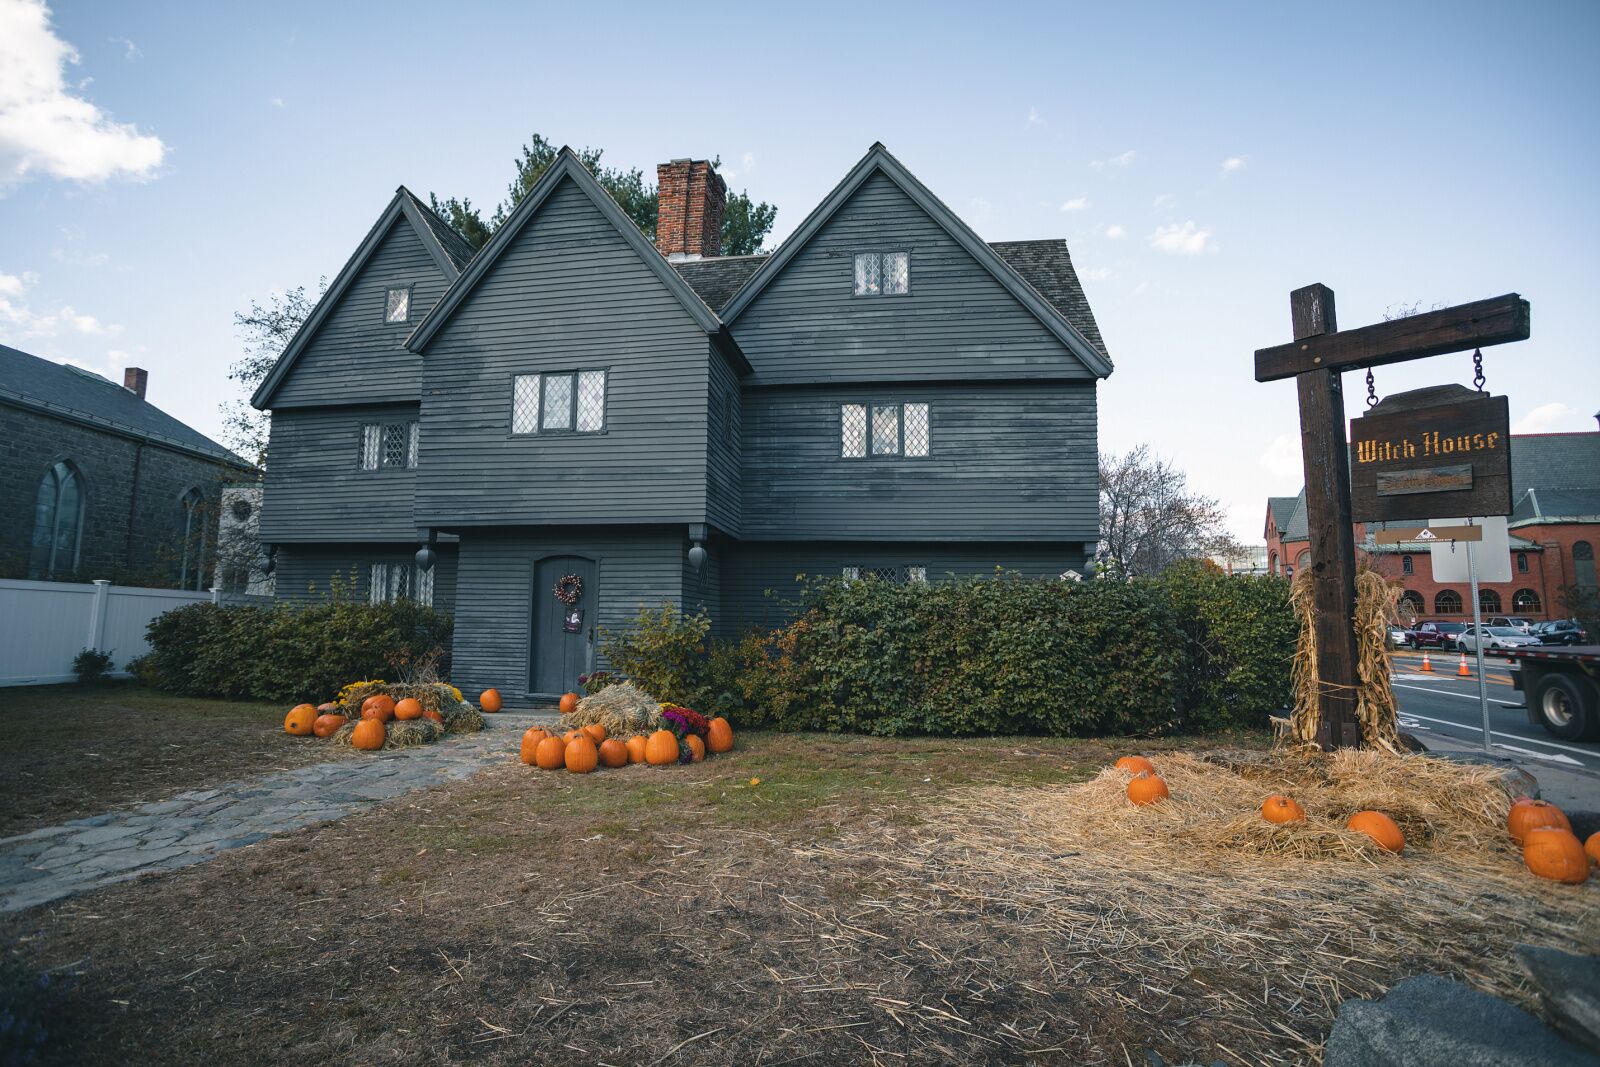 spooky cities us salem witch house